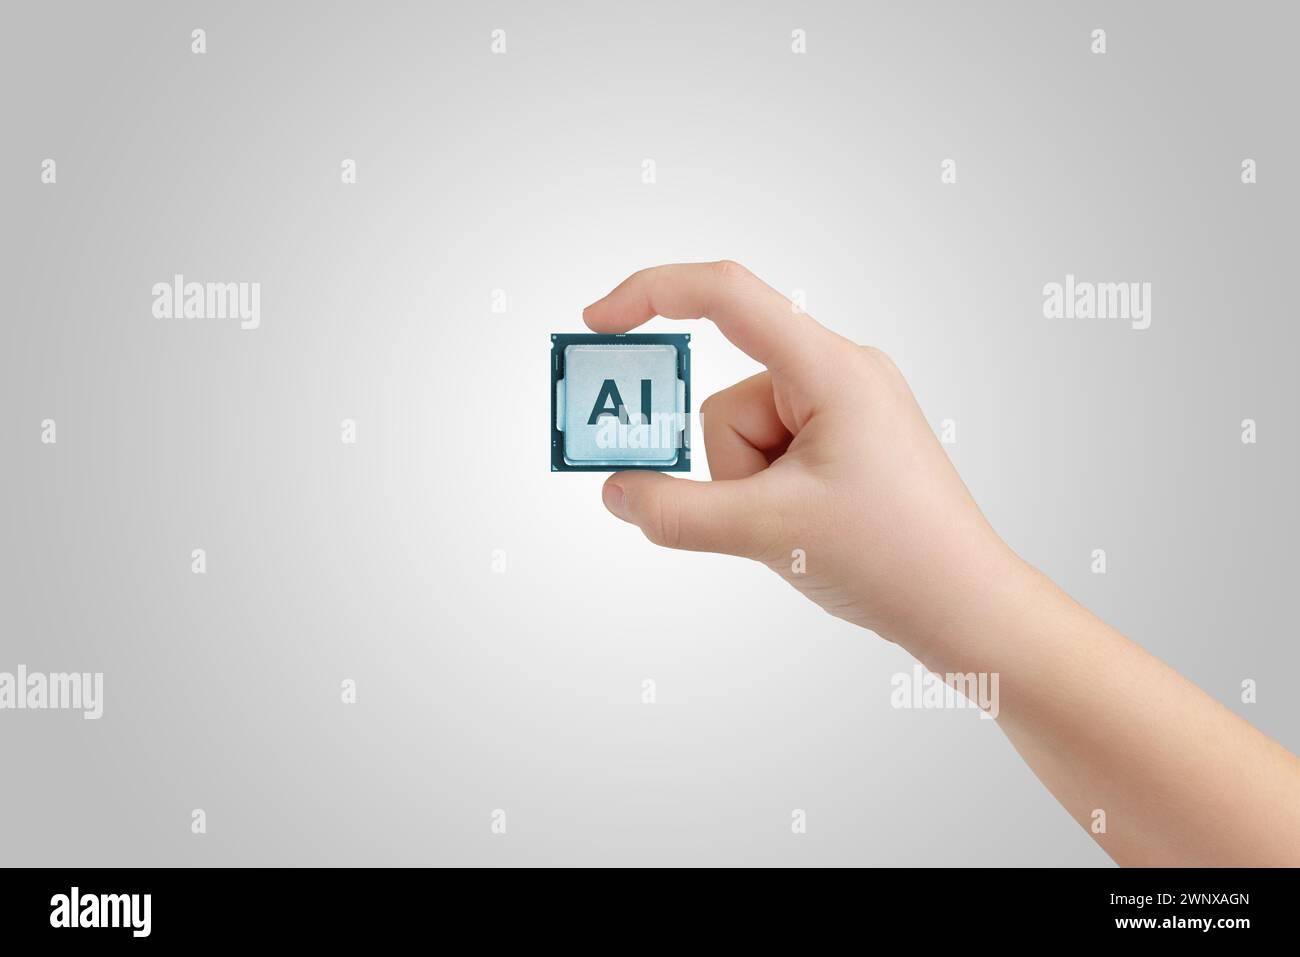 Hand holding AI chip. Symbolizing advancements in ai technology and machine learning development Stock Photo